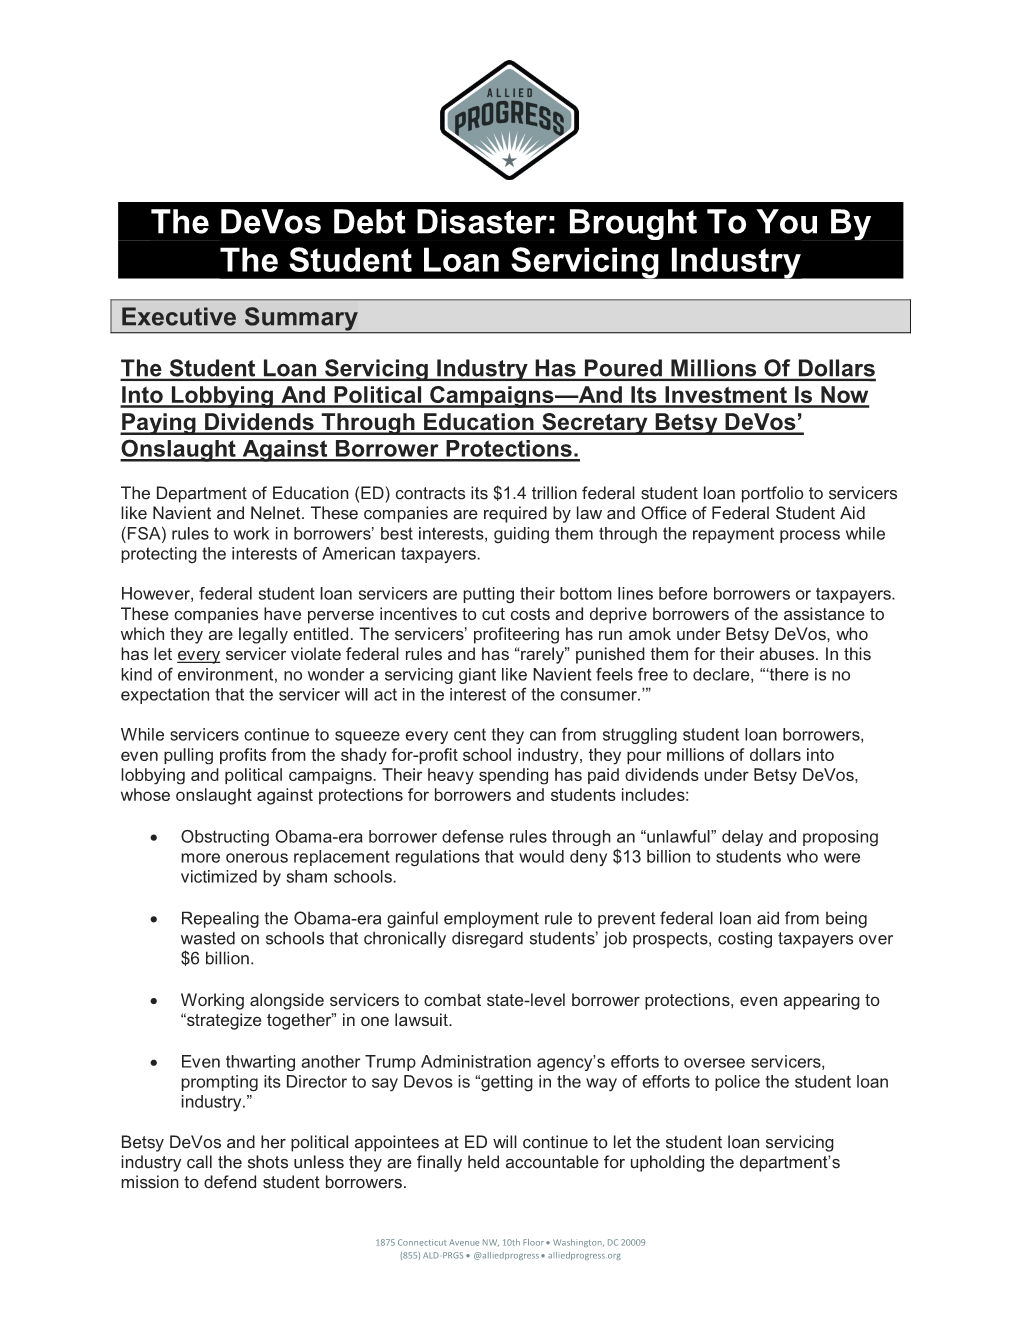 The Devos Debt Disaster: Brought to You by the Student Loan Servicing Industry